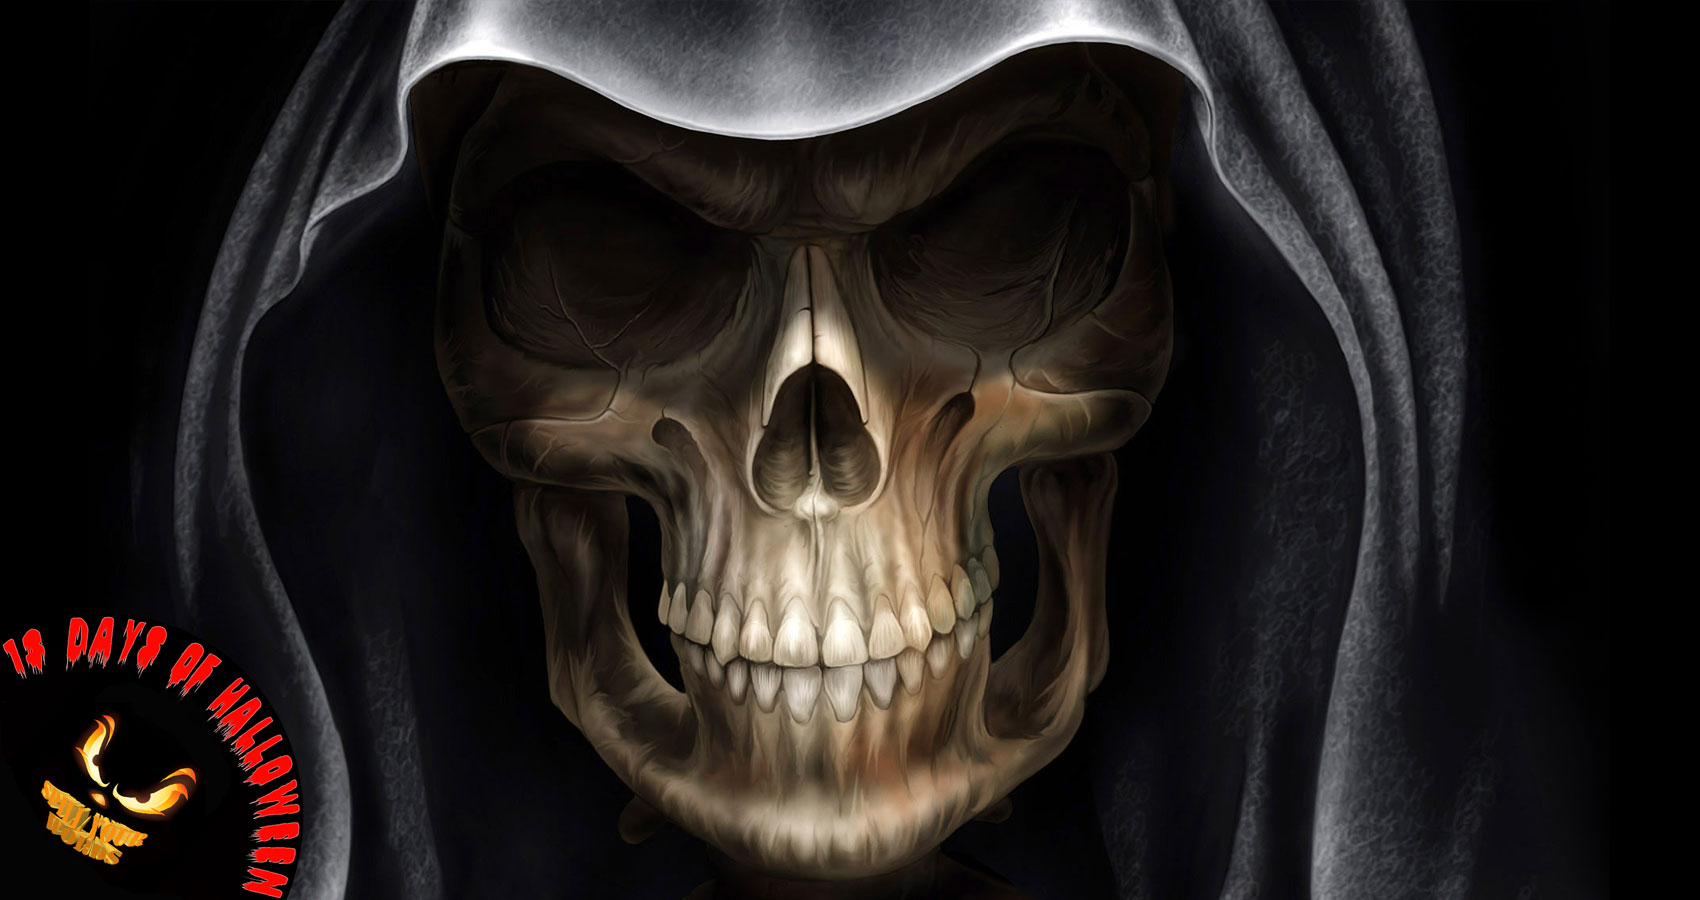 The Thirteen Days of Halloween - Death and The Old Man by Daniel S. Liuzzi at Spillwords.com